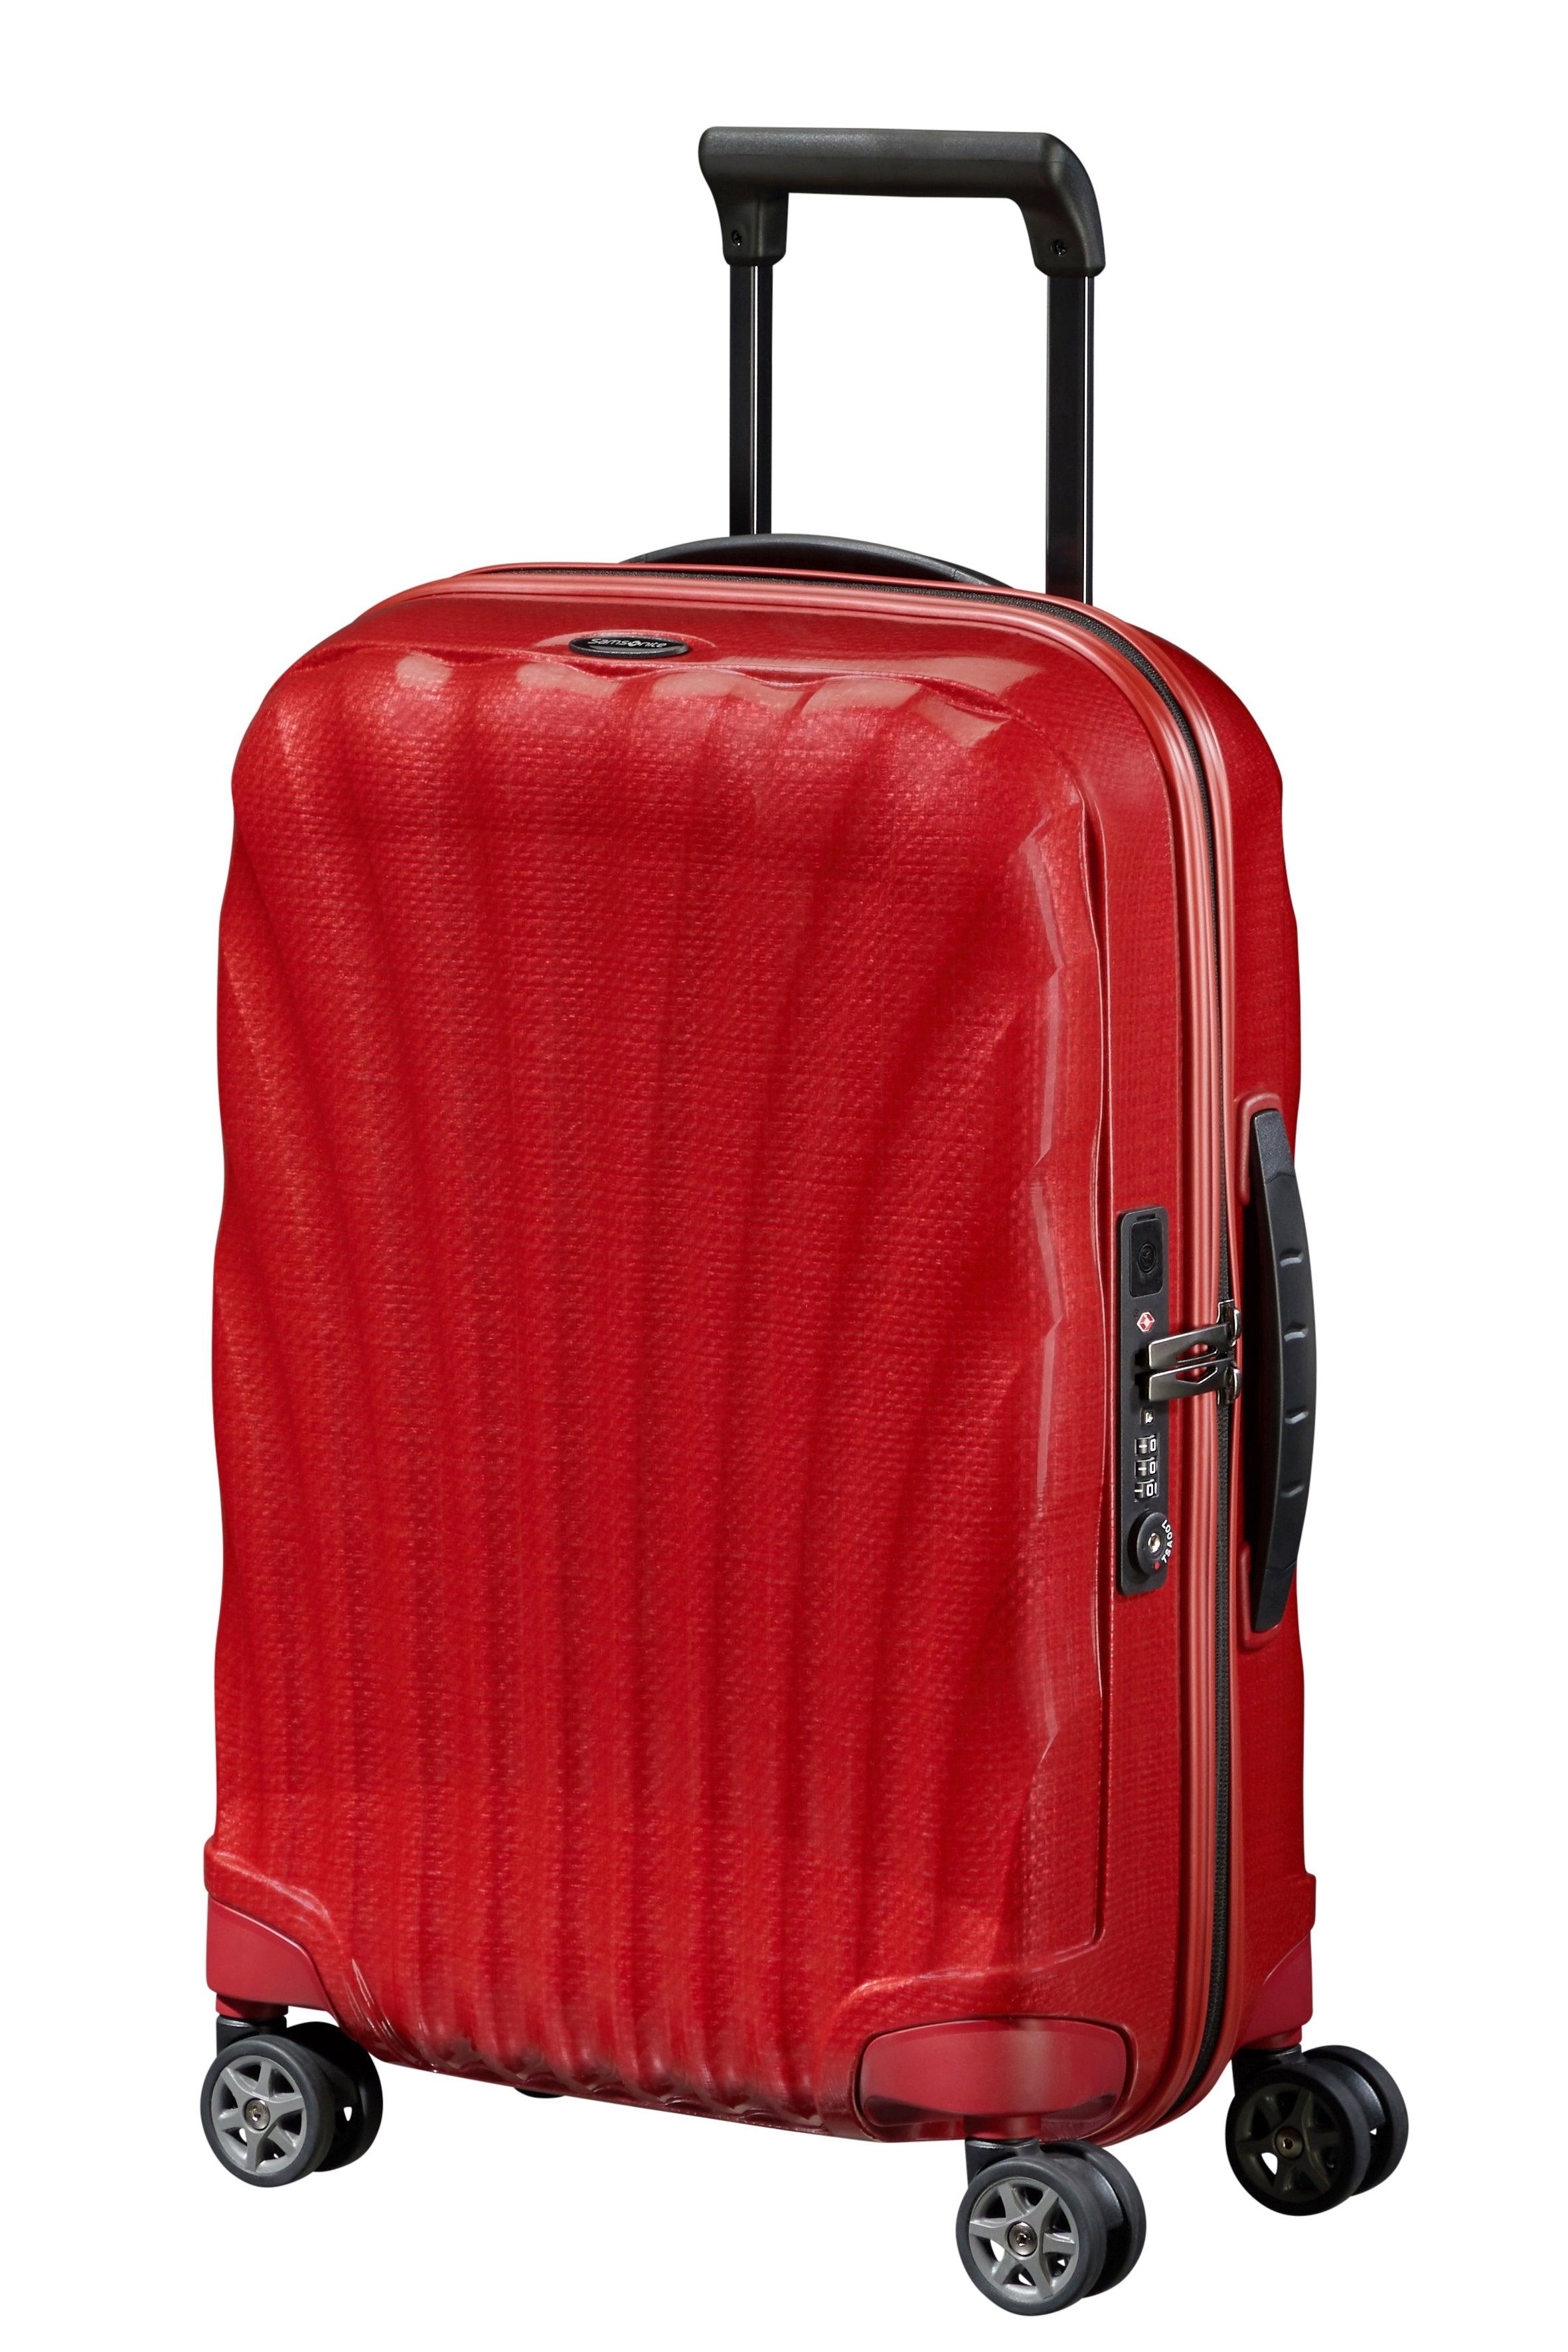 it luggage 27" Ultra Lightweight Hardside Spinner Expandable